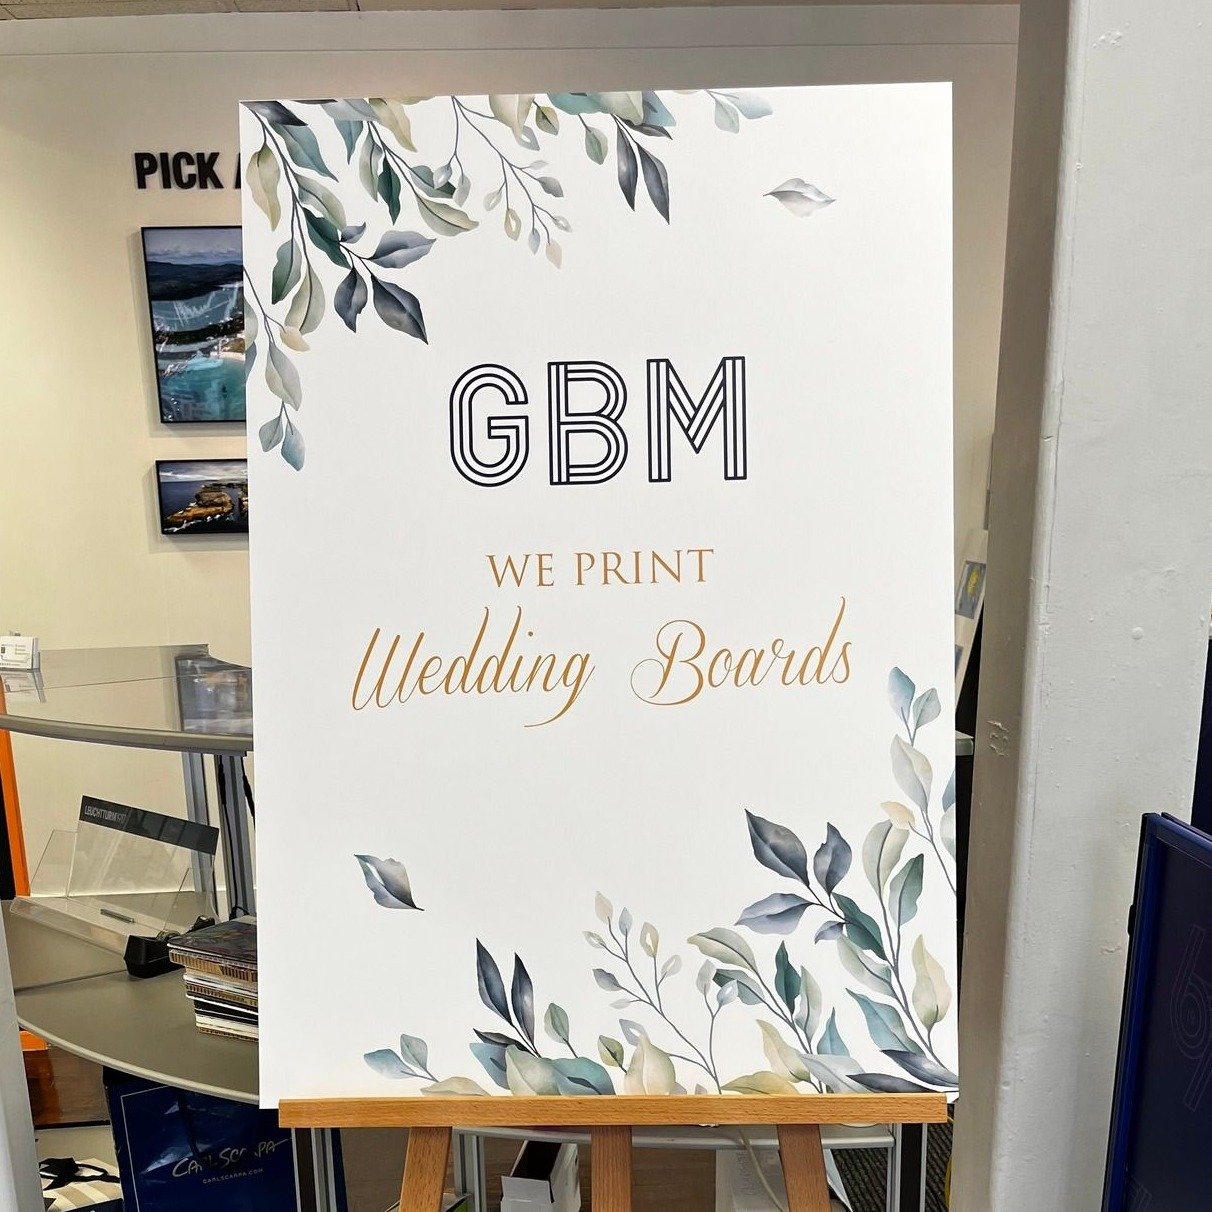 Did you know that we can print your Wedding boards?

From welcome signs to seating charts, we print them all. 

Email enquires to sales@gbmlimerick.ie

#weddings #weddingboard #printing #gbm #welcomesign #madeinireland